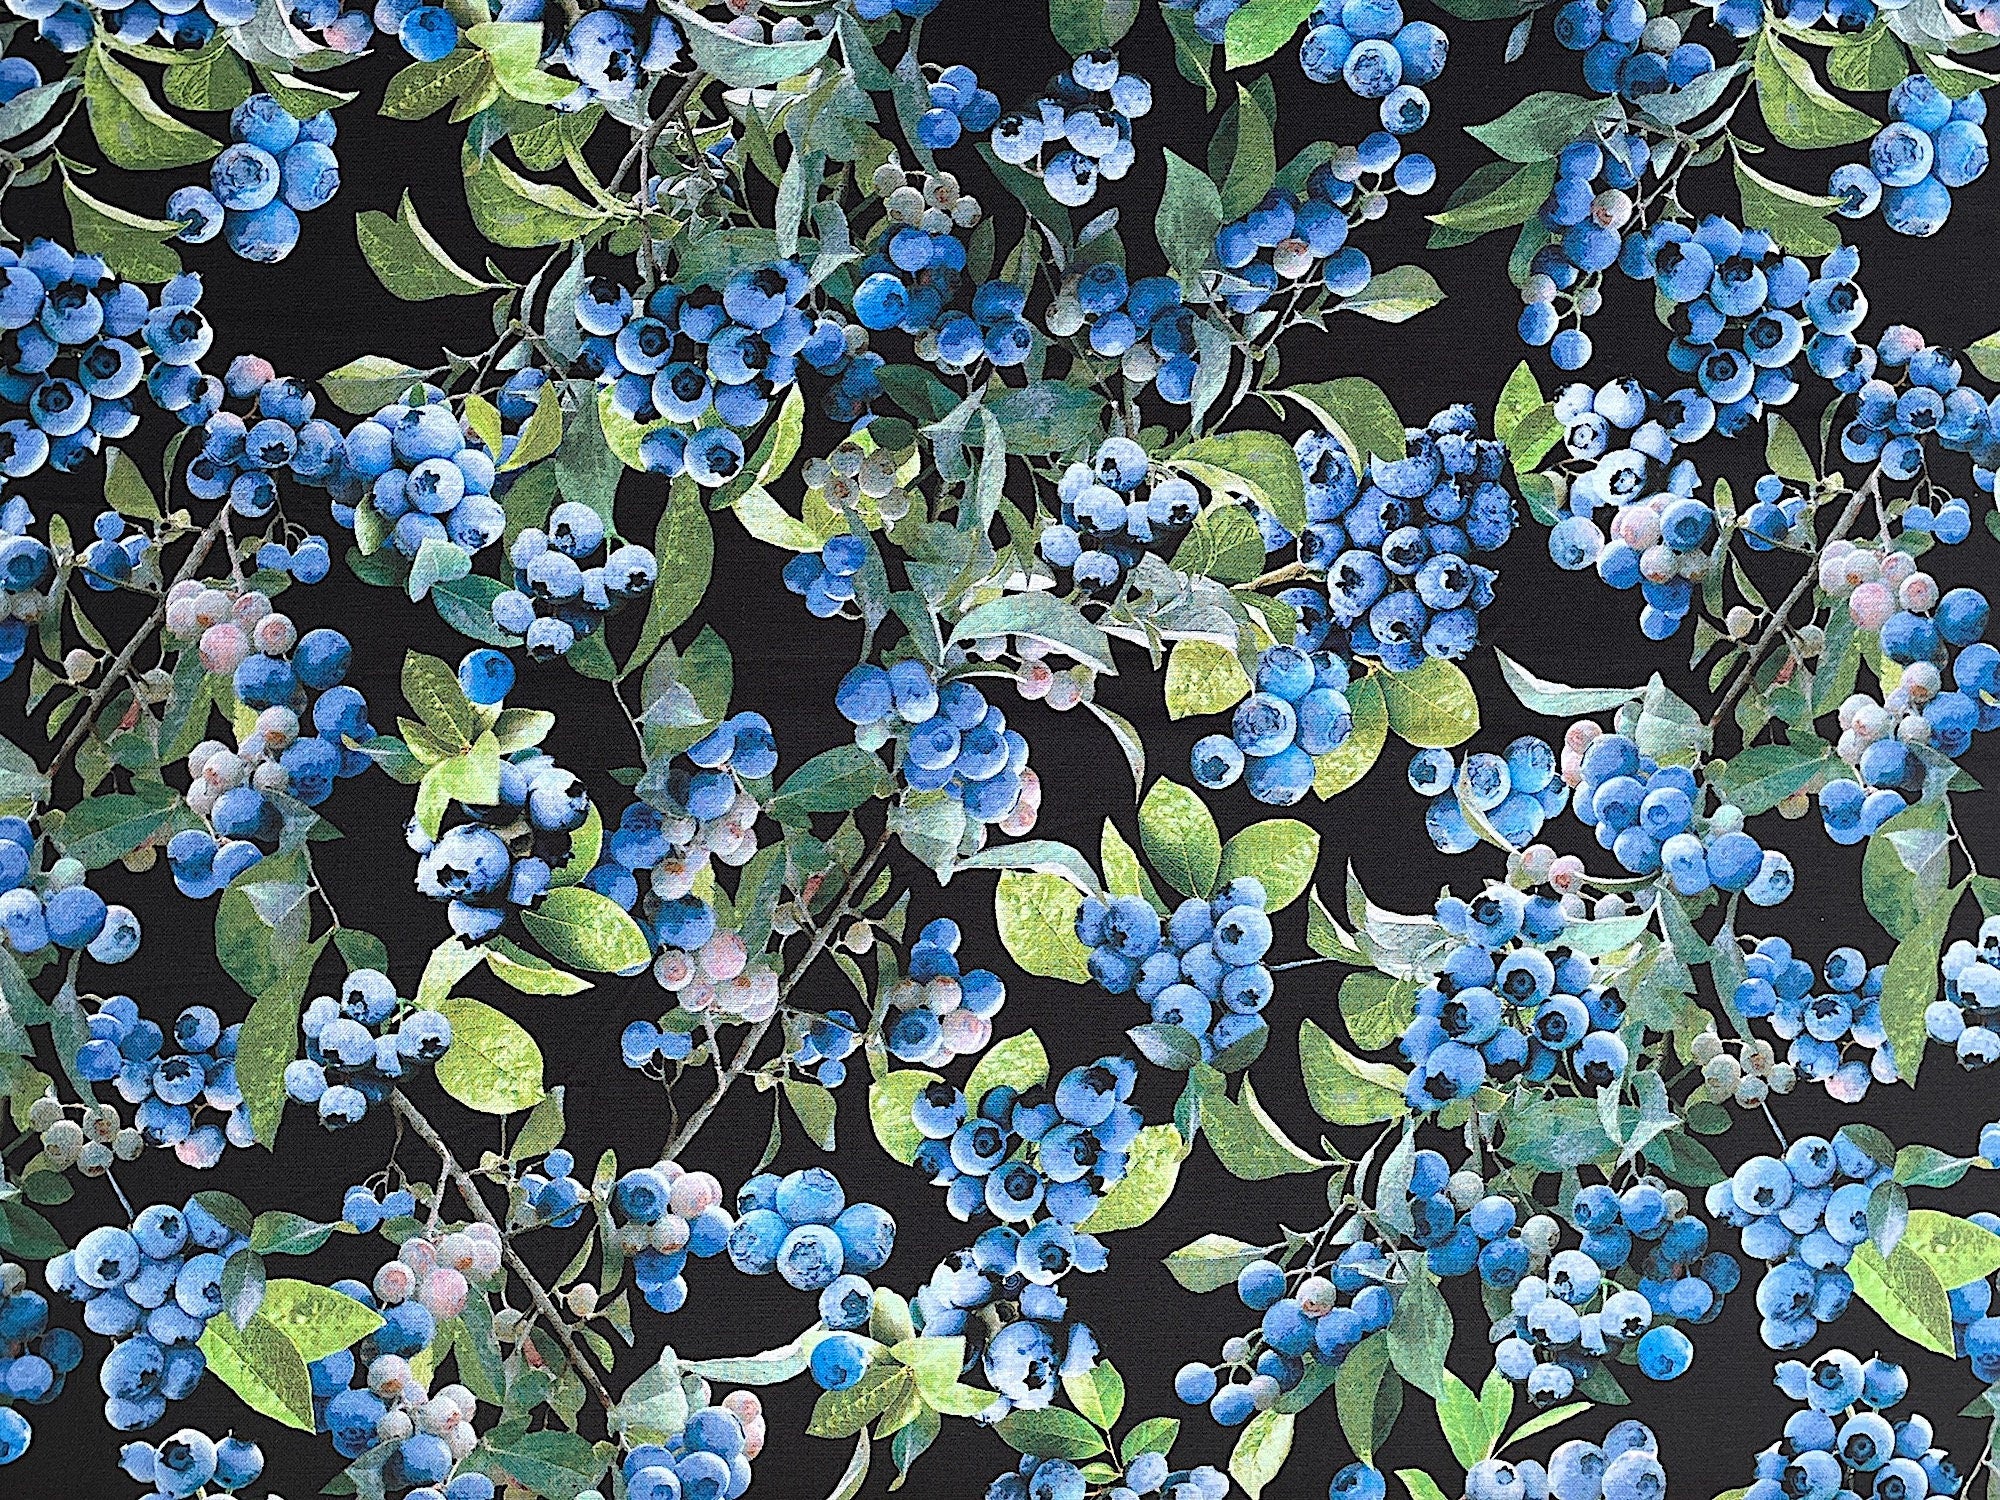 This black fabric is covered with blueberry bunches and green leaves. This fabric is part of the Blueberry Hill collection by Kanvas Studio